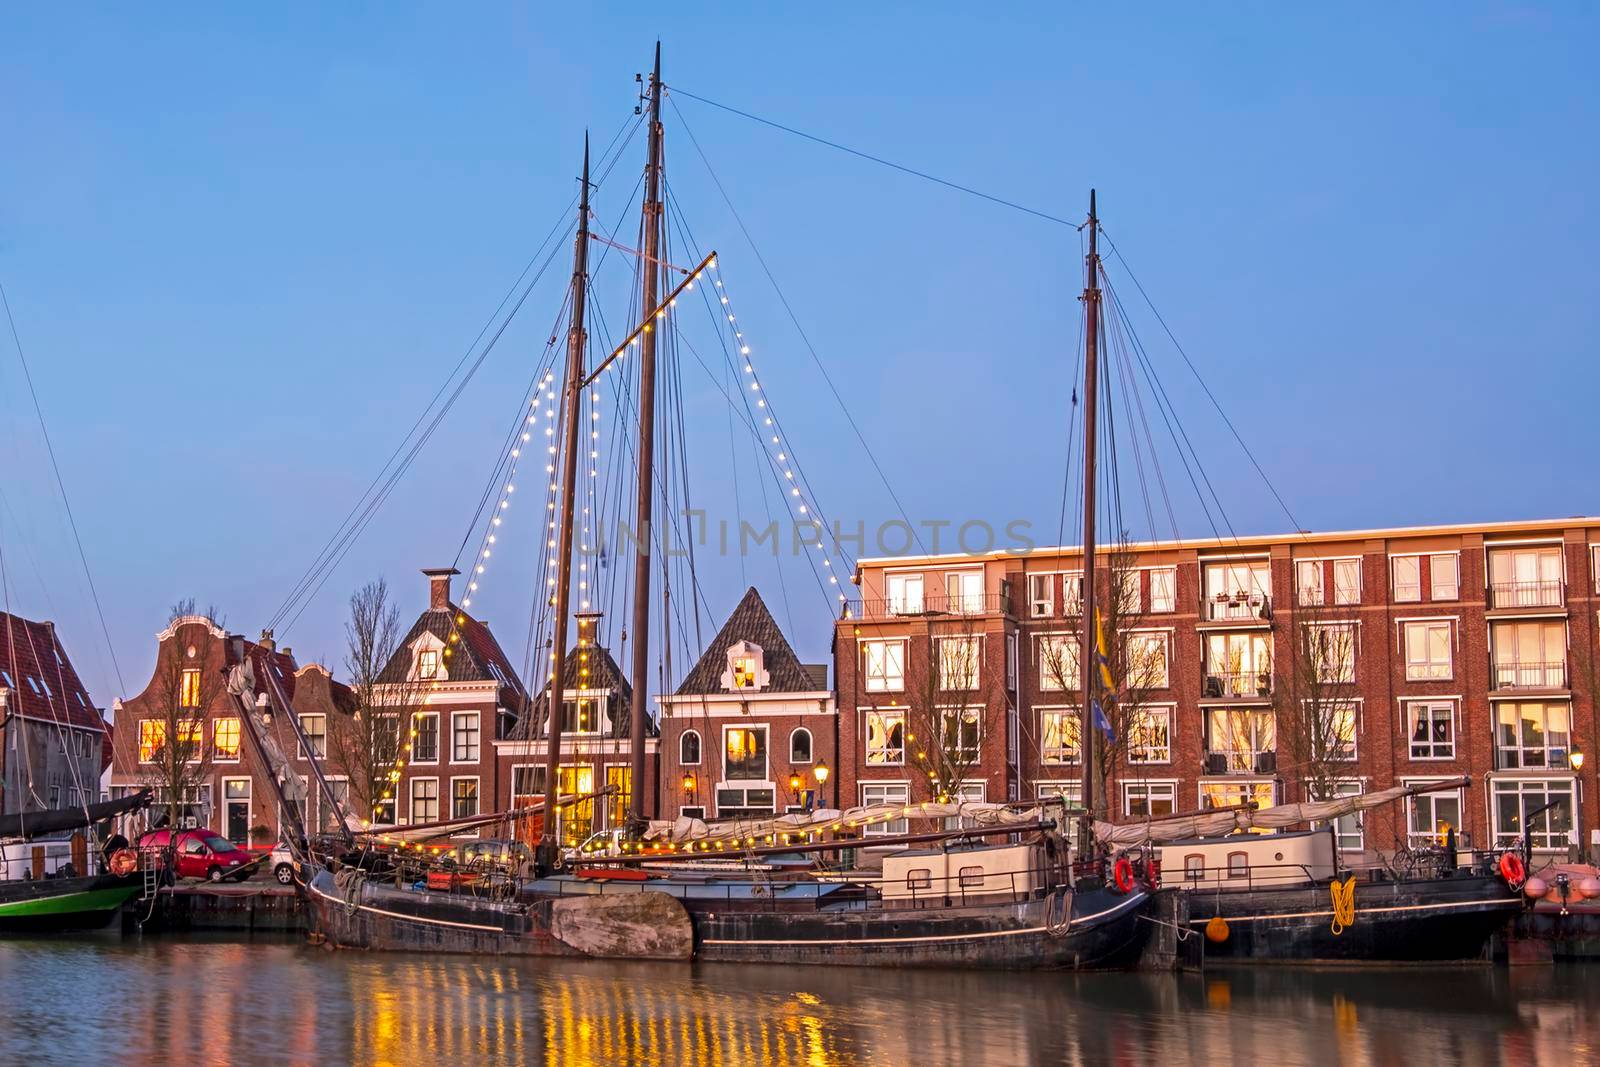 Decorated traditional sailing ship in the harbor from Harlingen in the Netherlands at sunset by devy